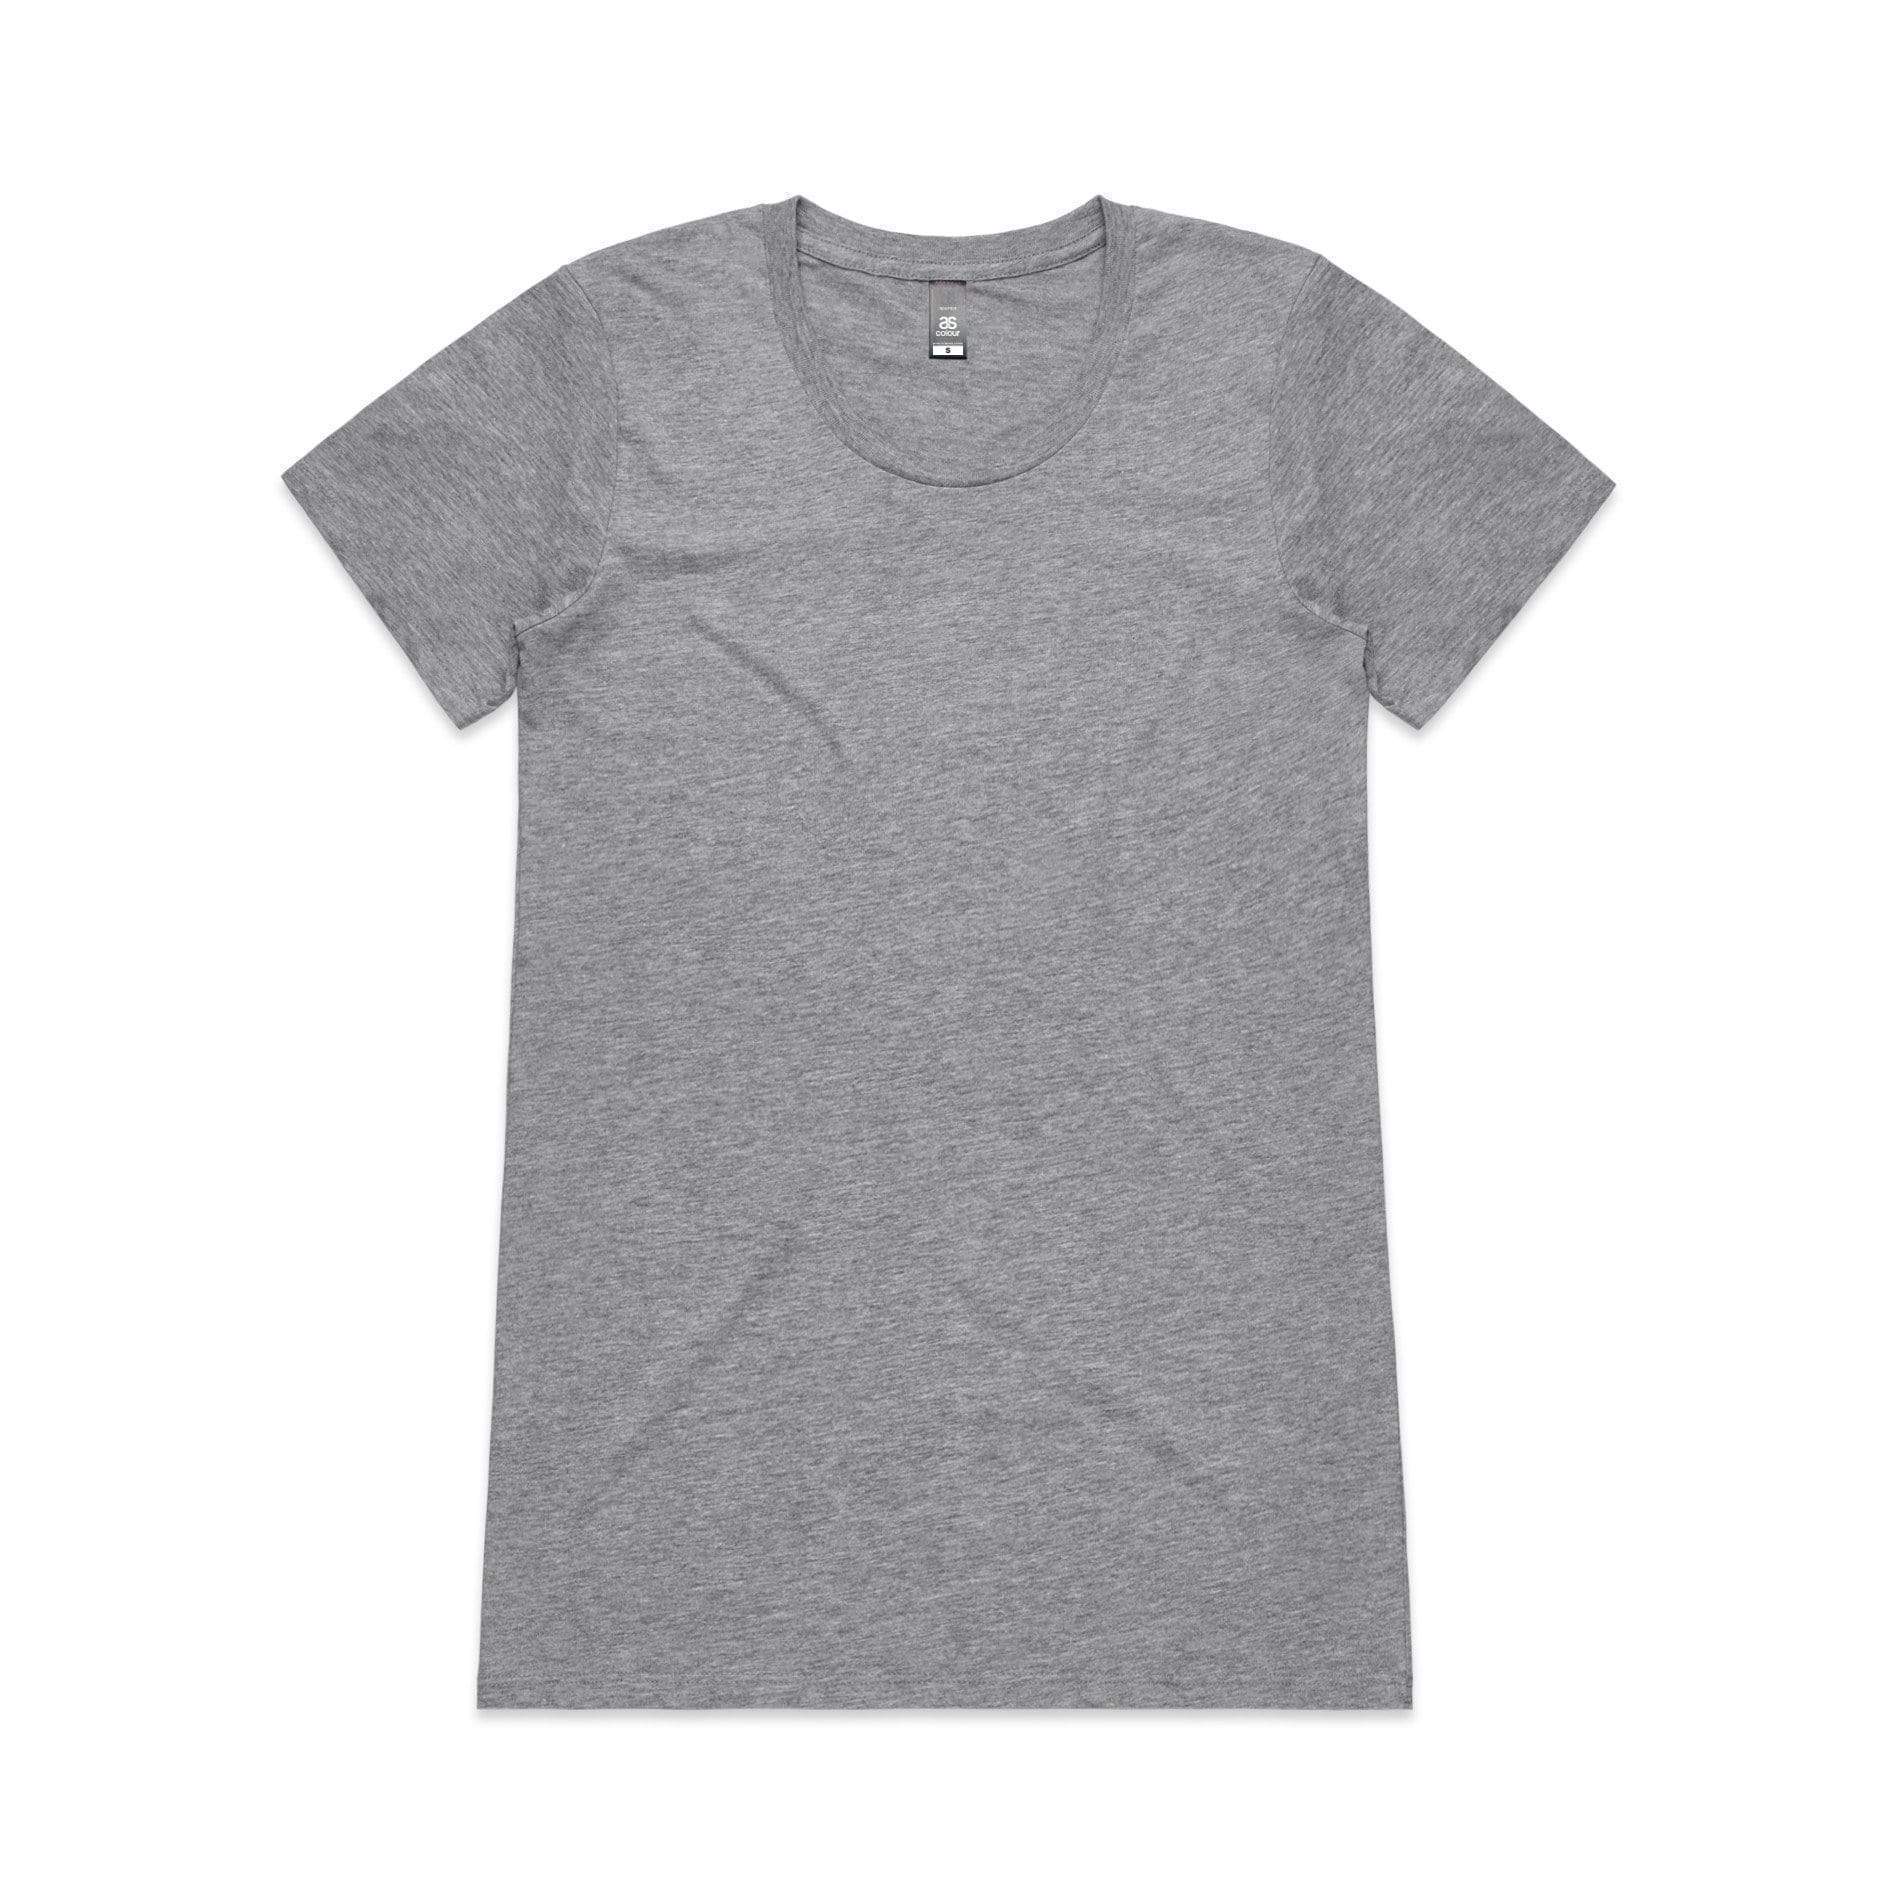 As Colour Casual Wear GREY MARLE / XSM As Colour Women's Wafer tee 4002